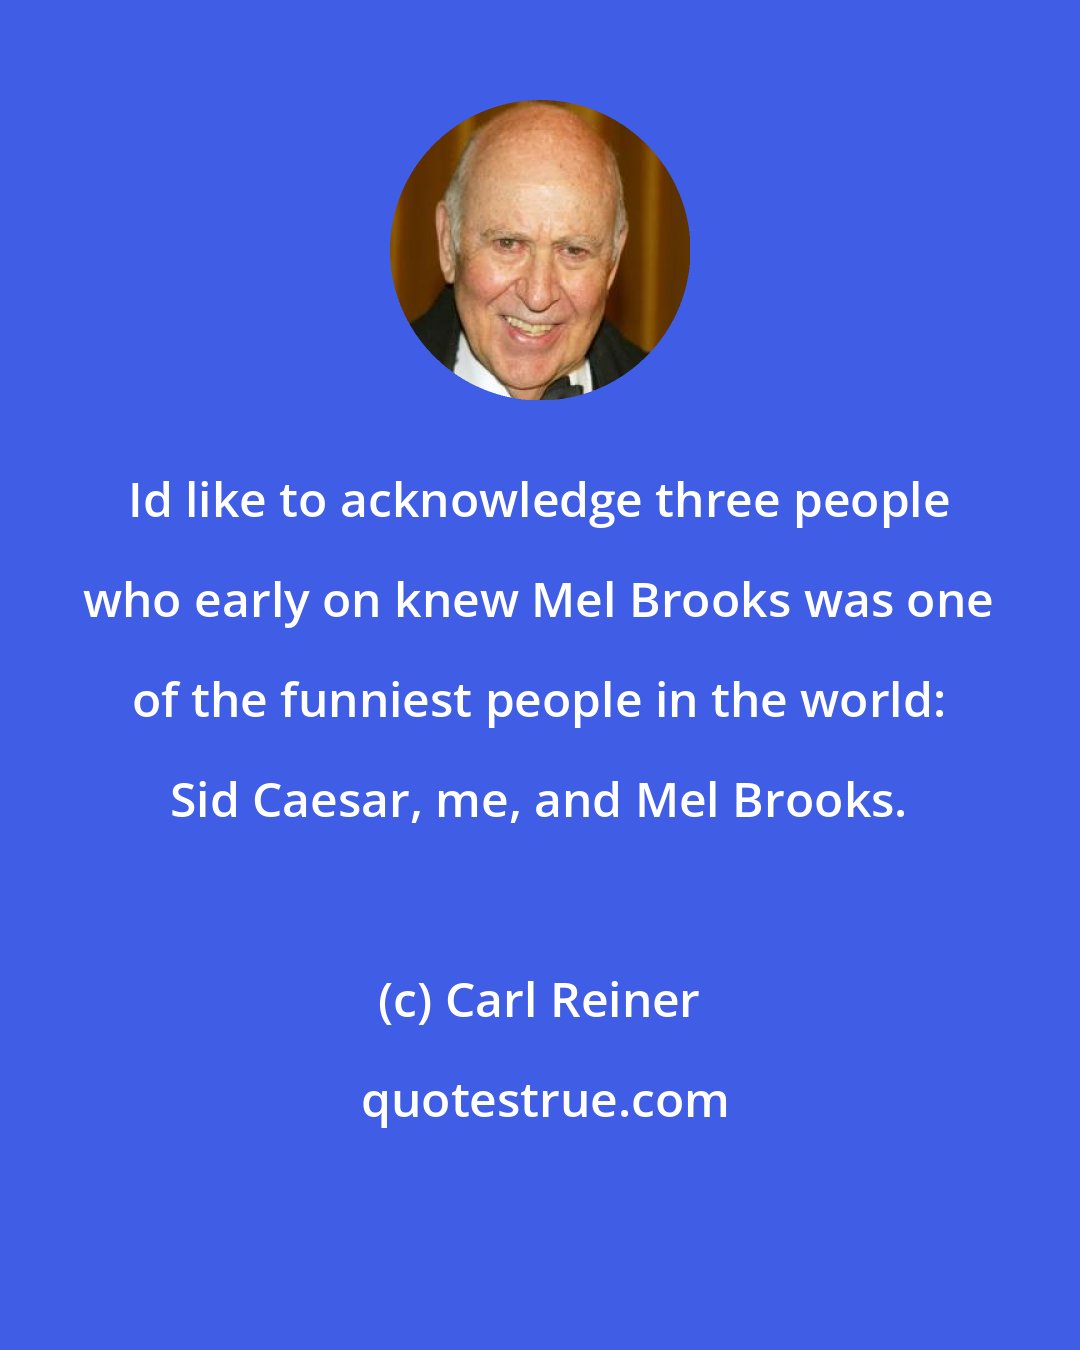 Carl Reiner: Id like to acknowledge three people who early on knew Mel Brooks was one of the funniest people in the world: Sid Caesar, me, and Mel Brooks.